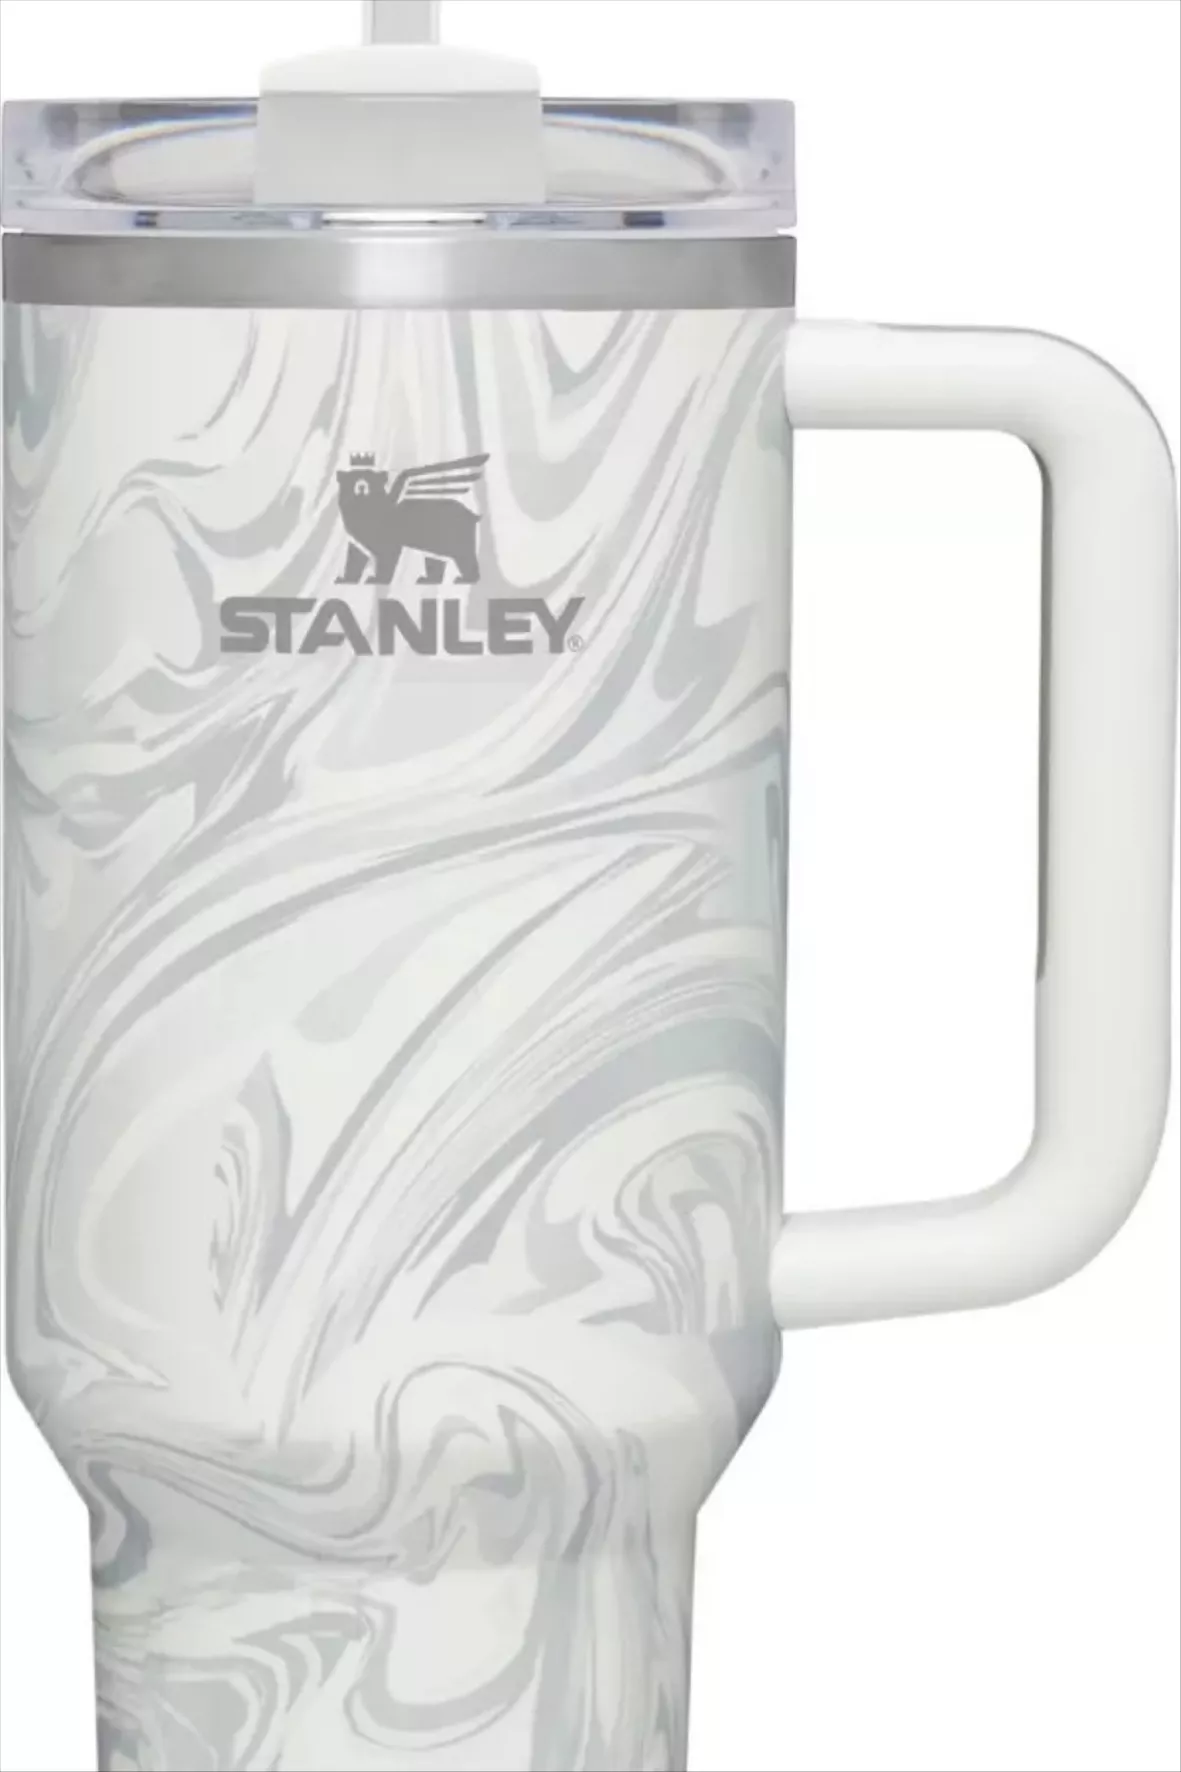 White and gray marble Stanley cup